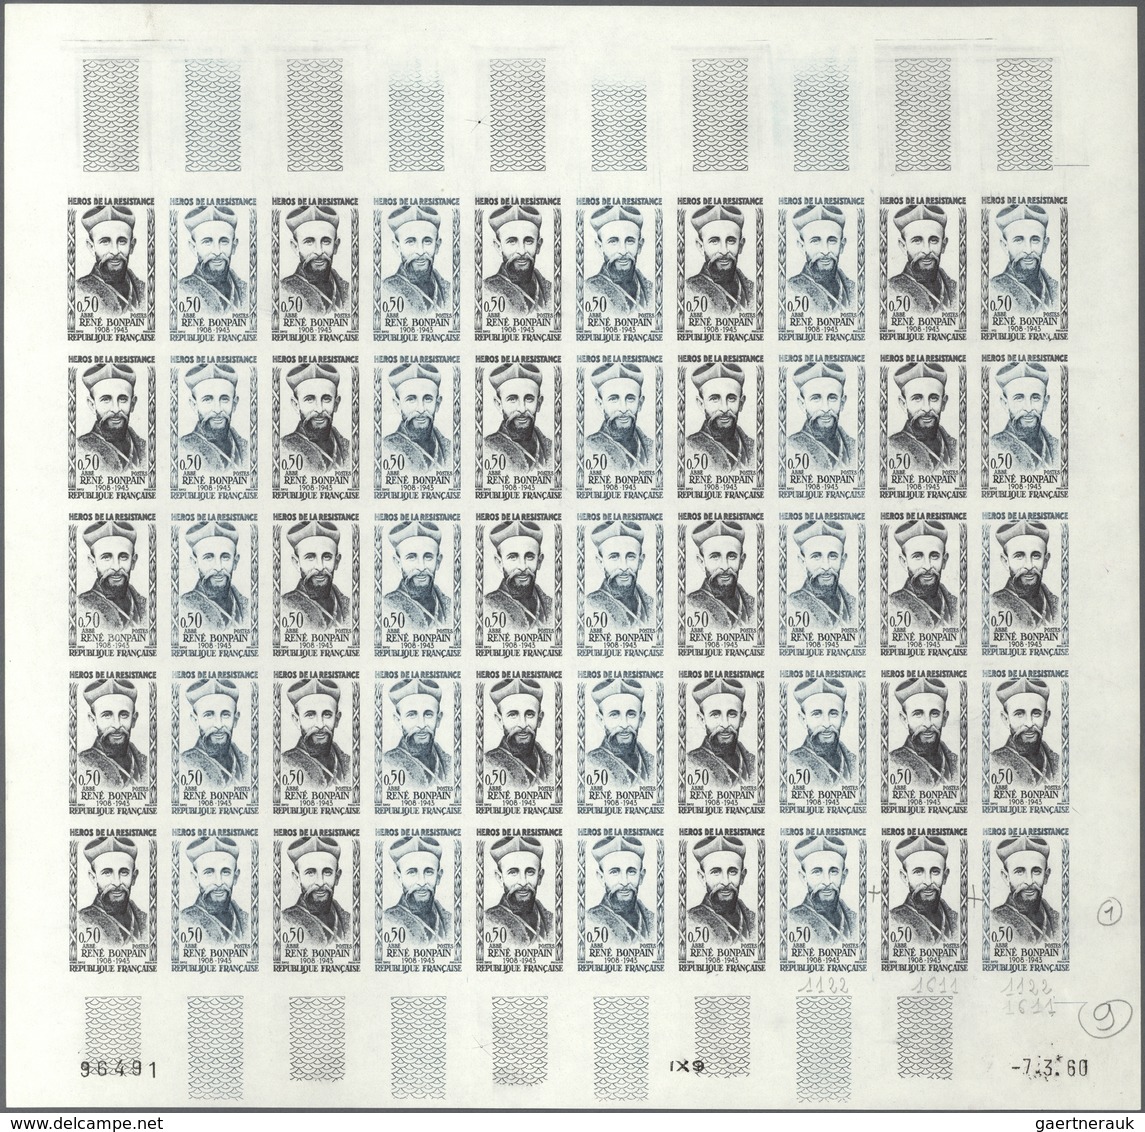 Frankreich: 1960, Set of 5 (3 different sheets of each) of the issues "Heroes of the resistance", Ed